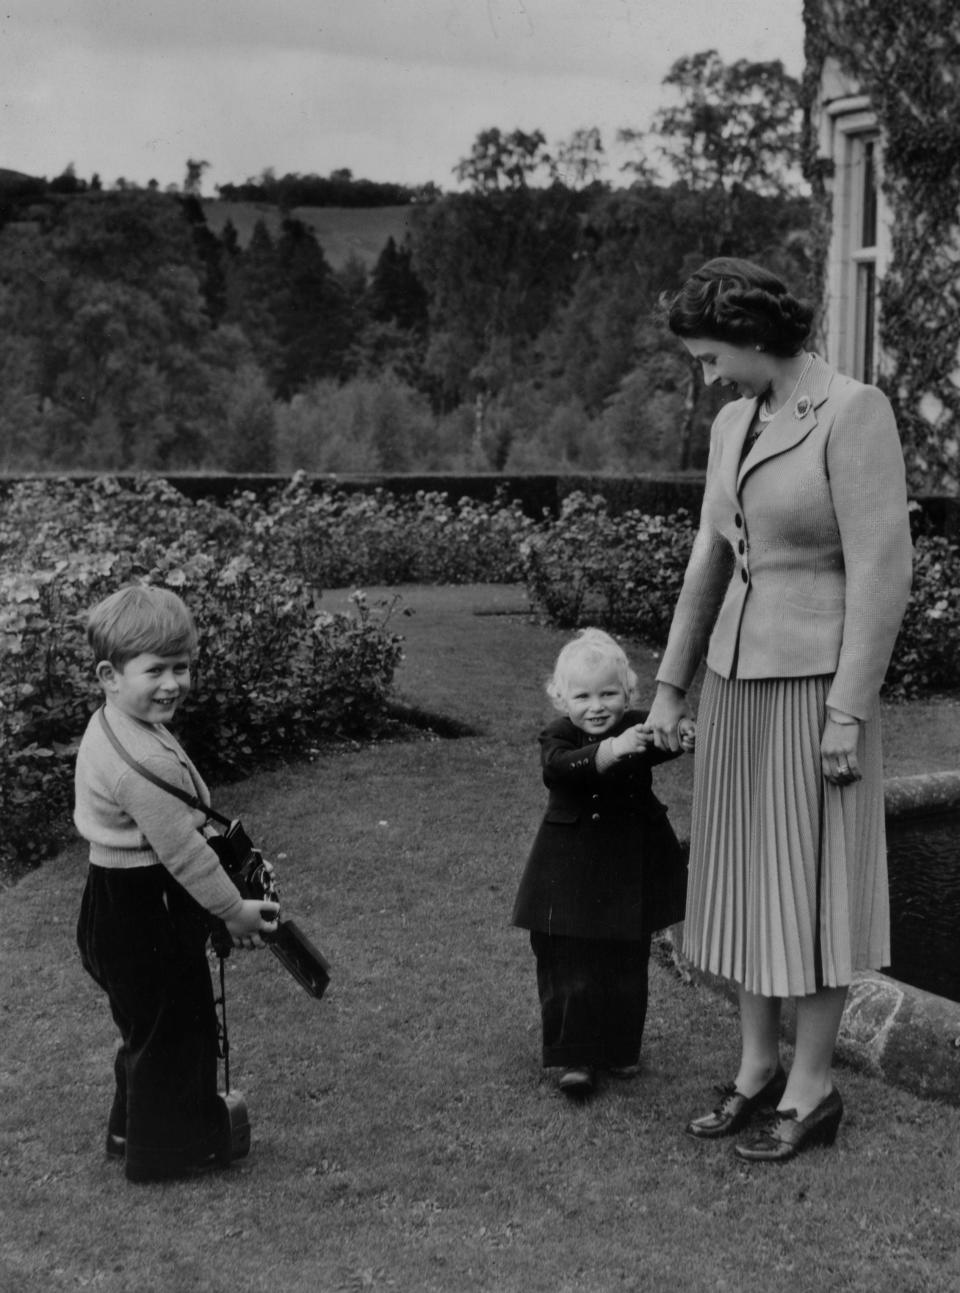 Queen Elizabeth II plays with her children Charles and Anne at Balmoral Castle